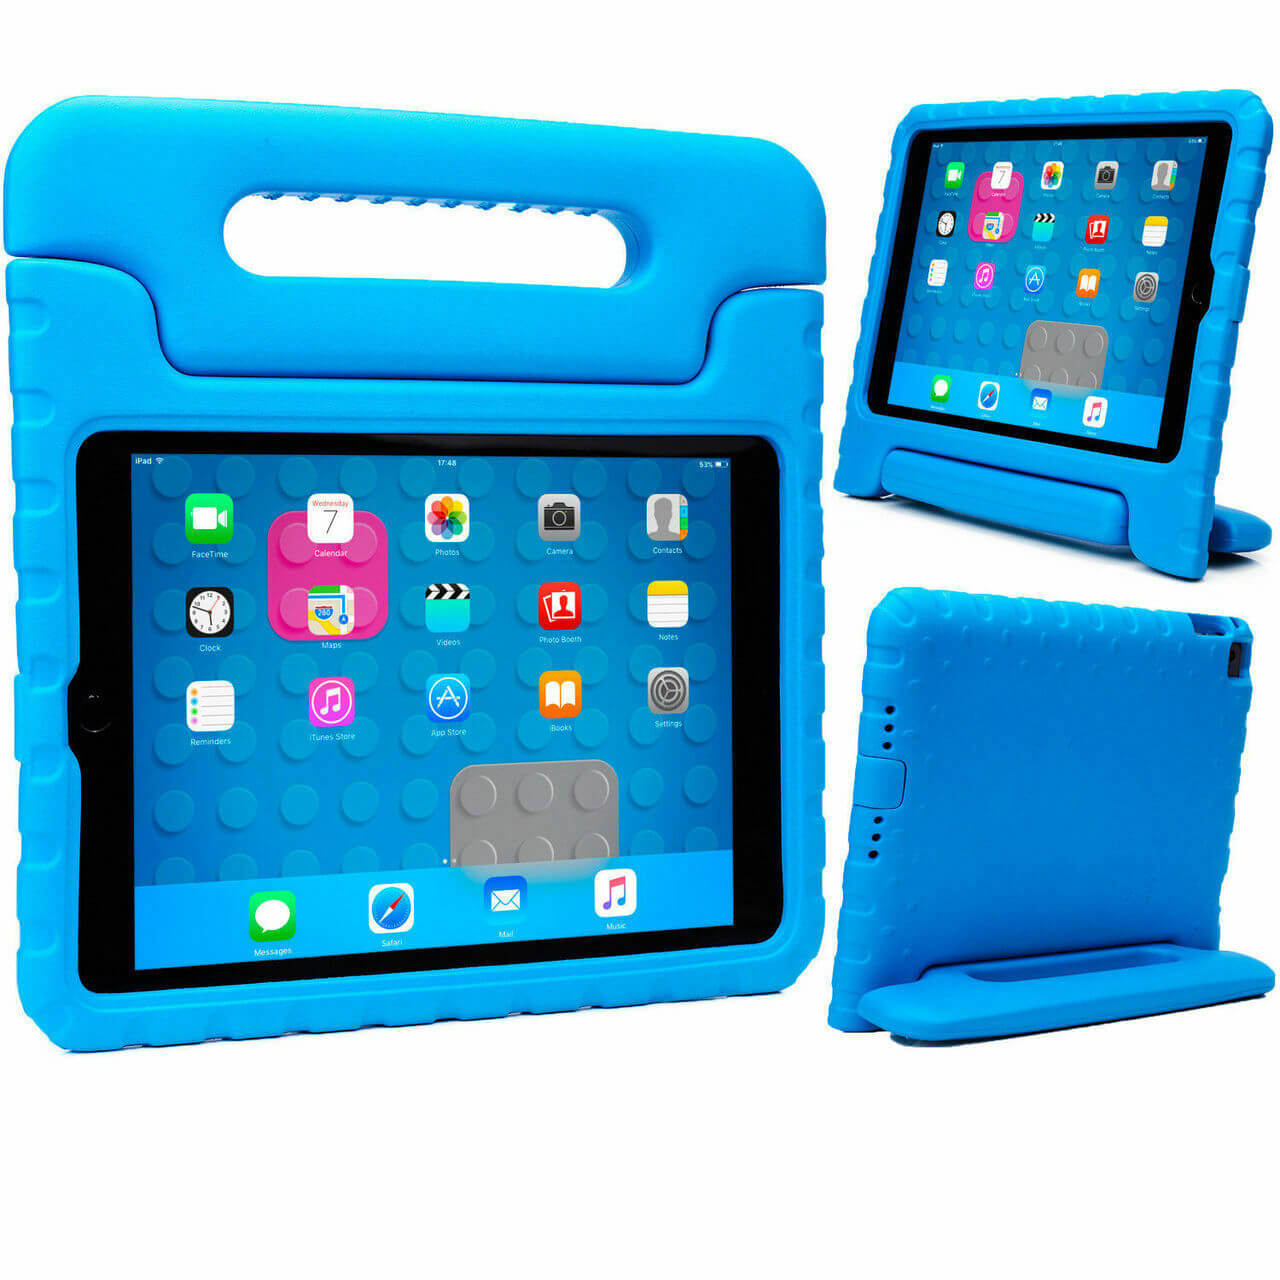 For Apple iPad 9.7" 2017 / 2018 Kids Case Shockproof Cover With Stand Blue